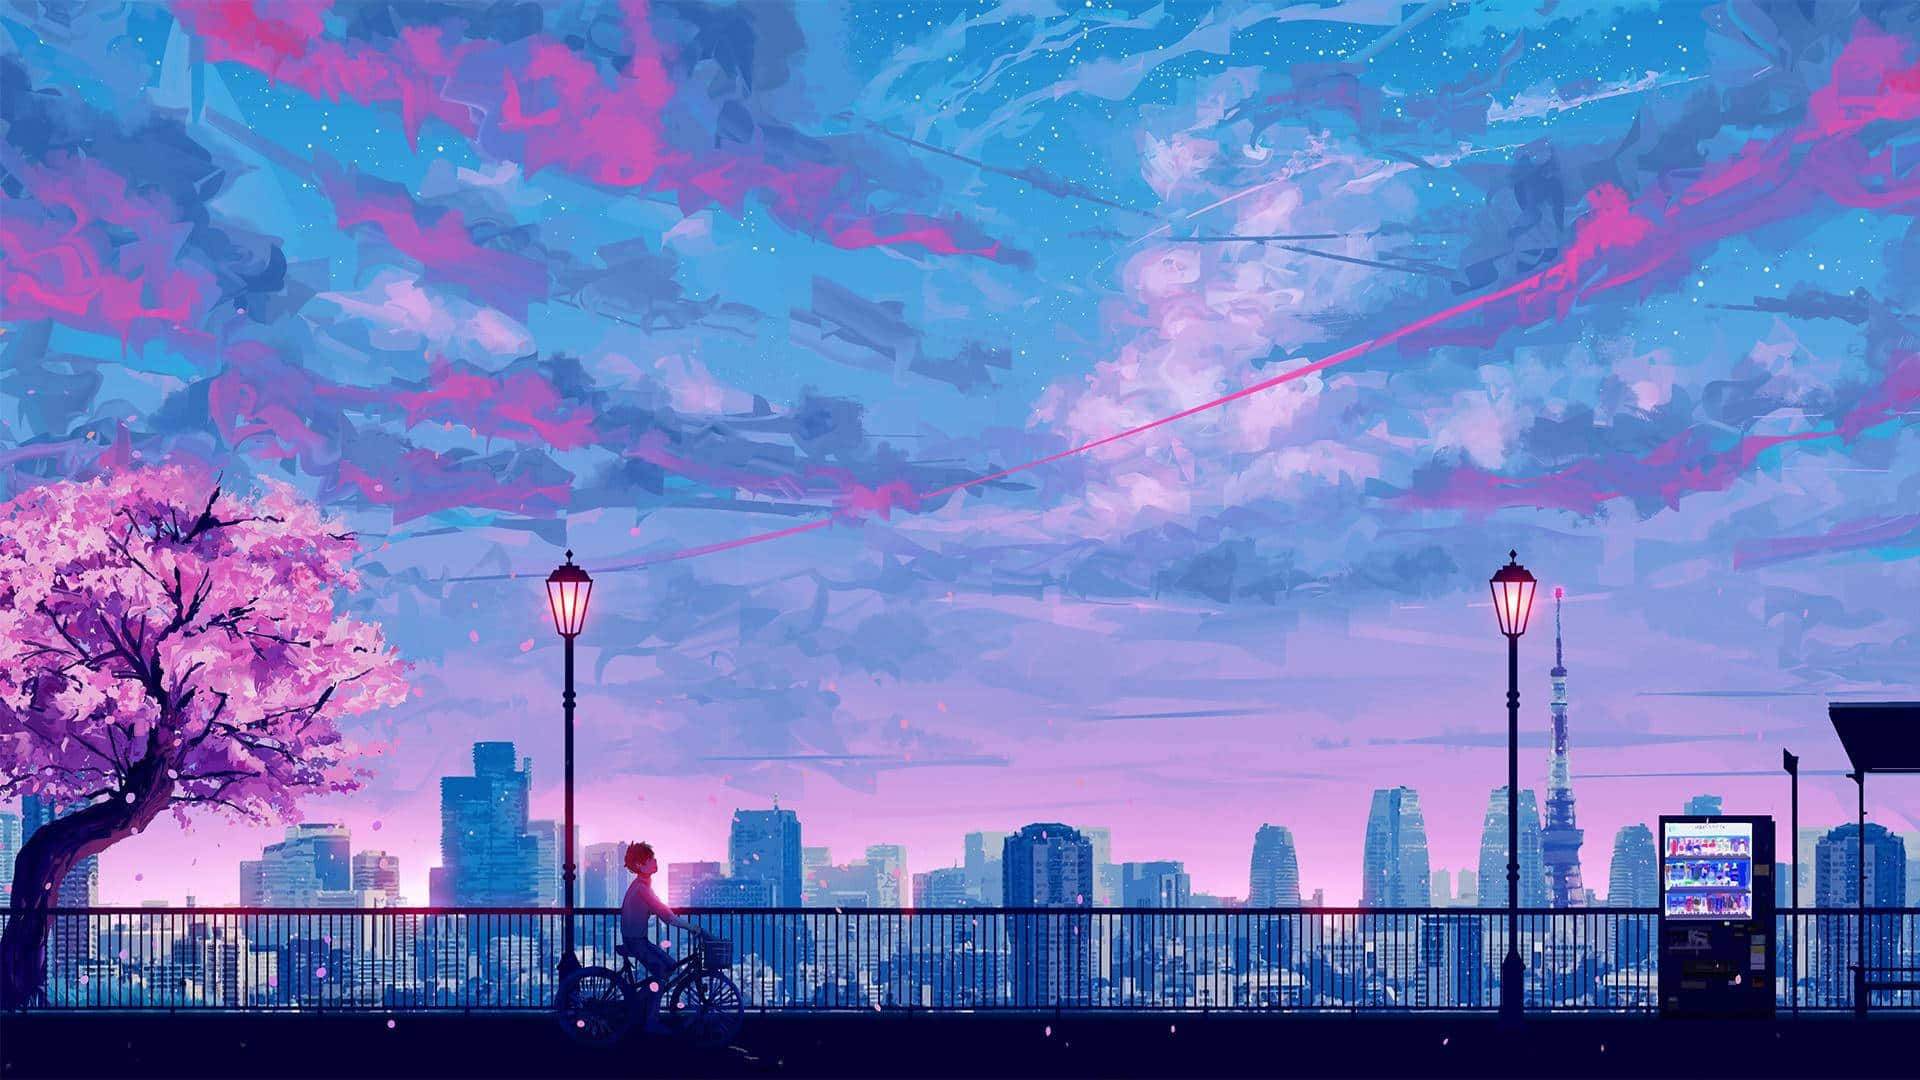 Lose yourself in the surreal hues of Purple Anime.